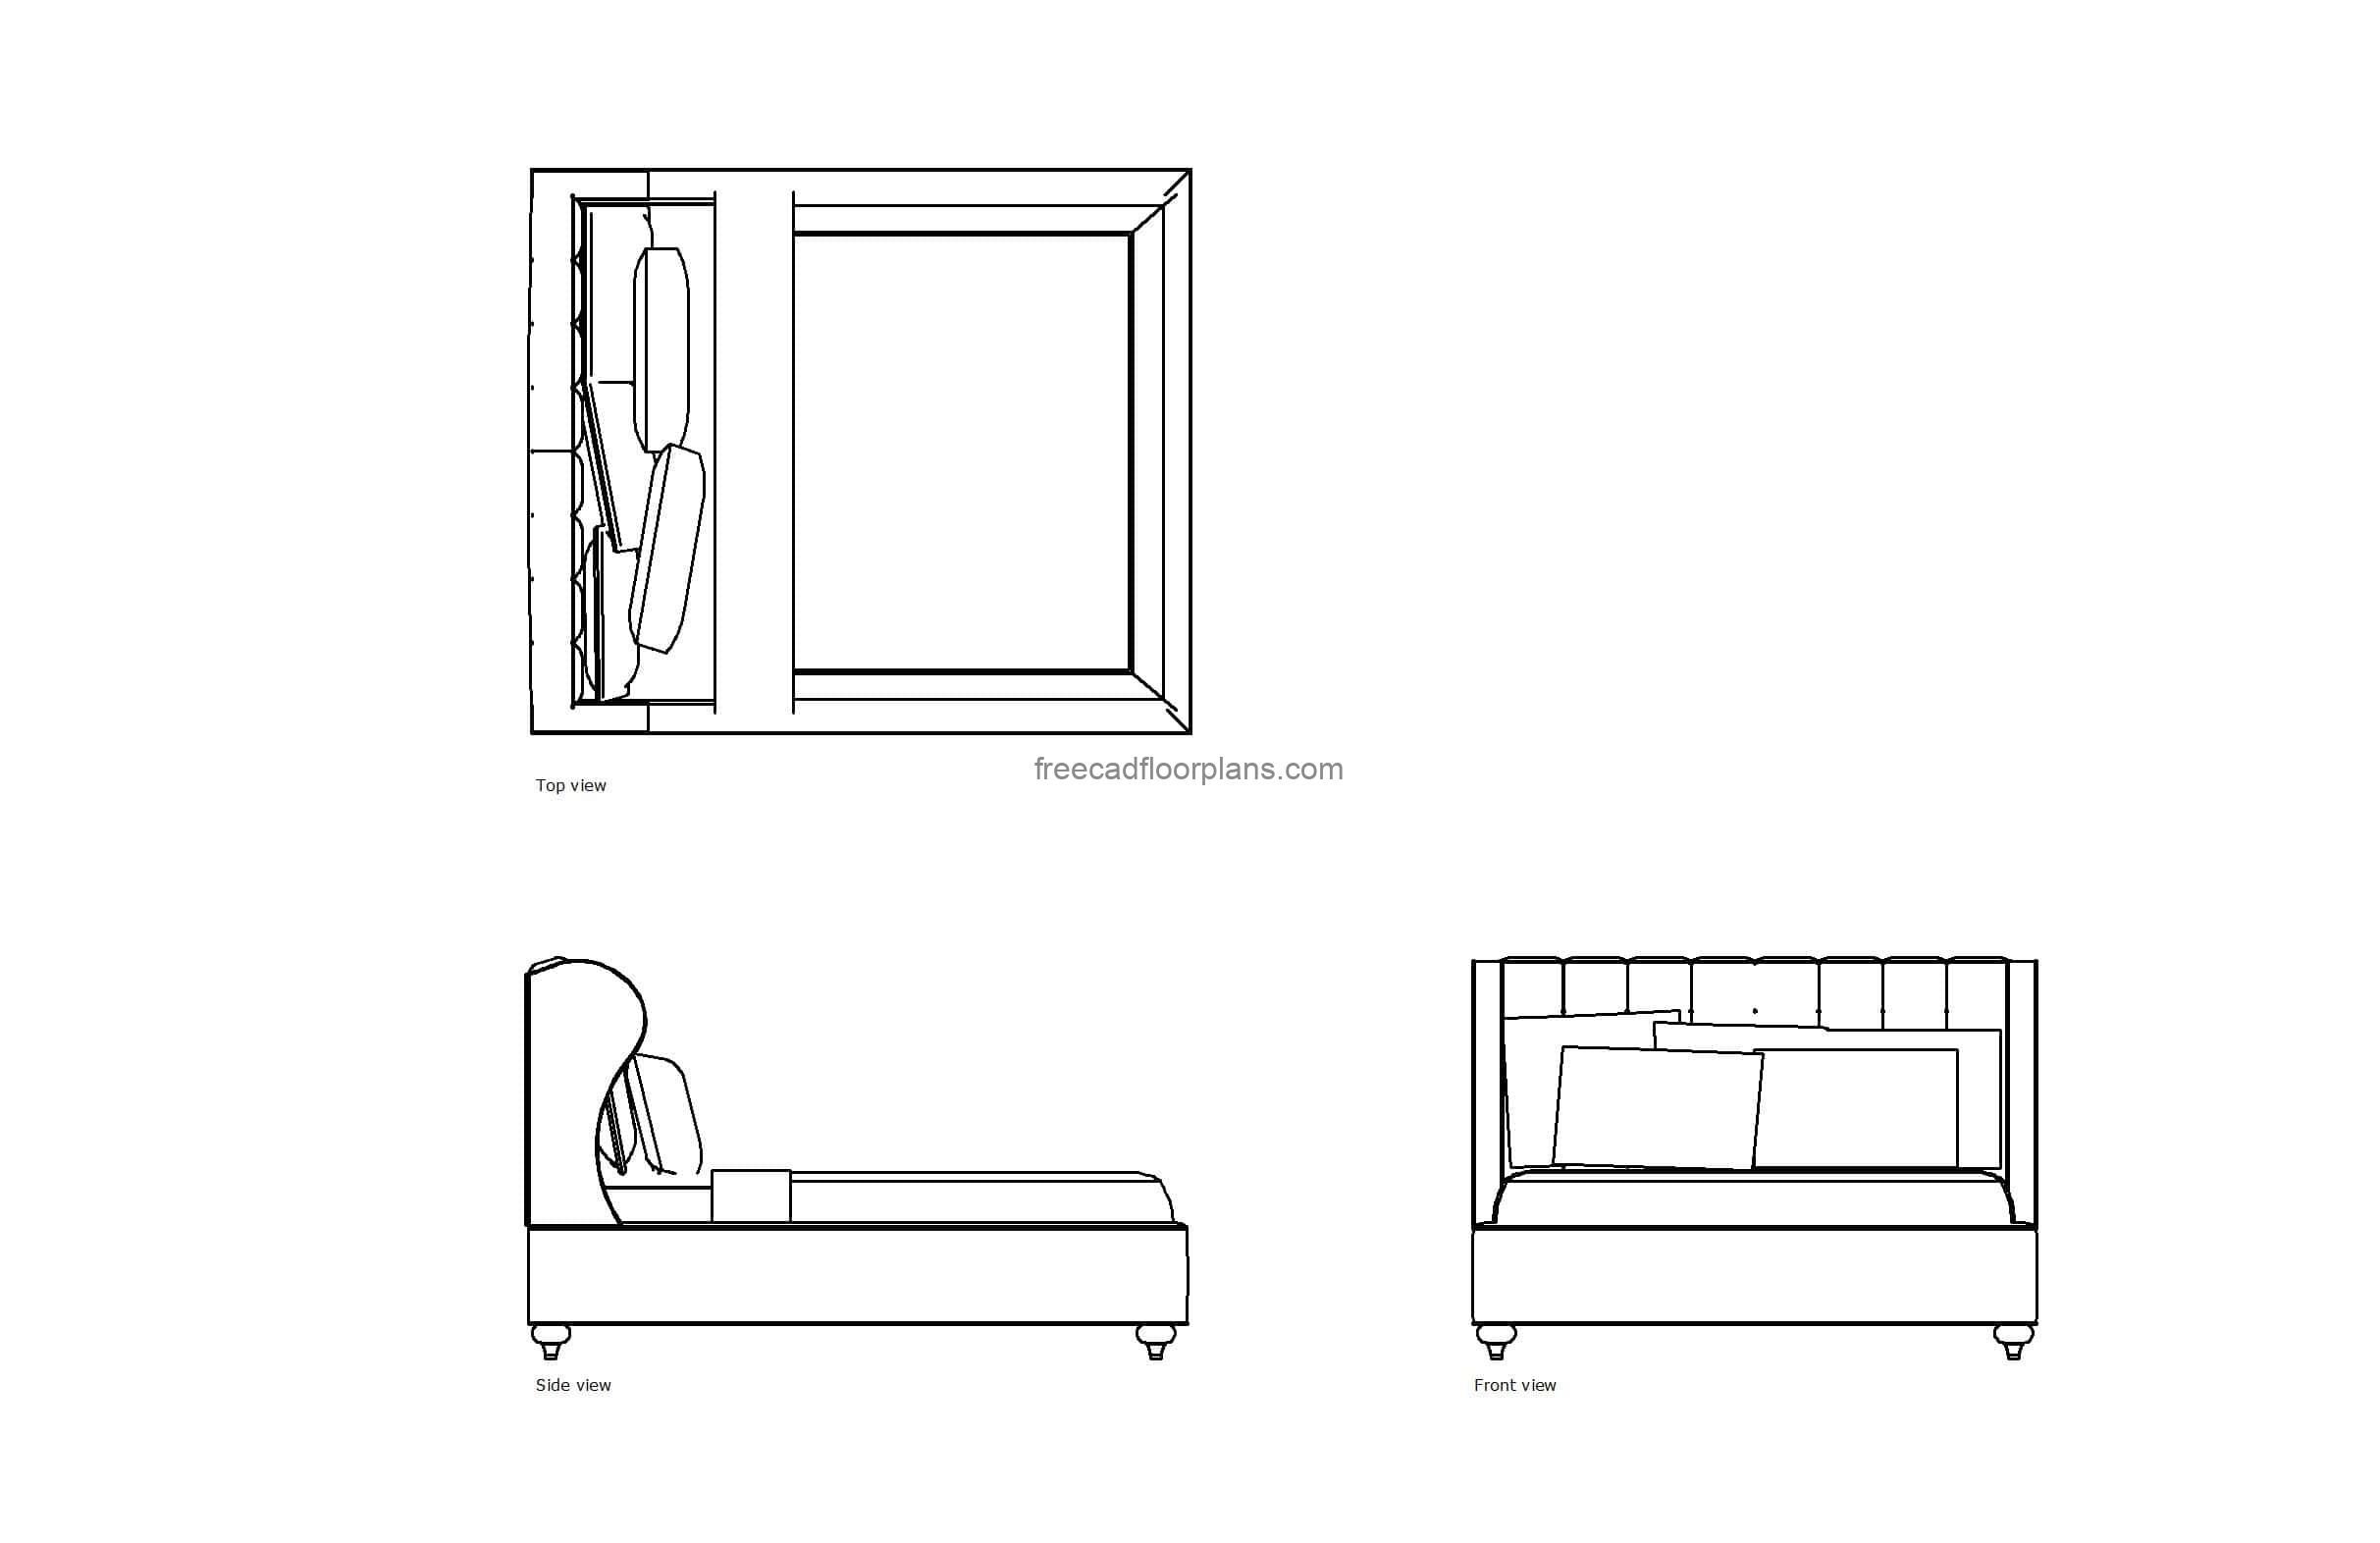 autocad drawing of an queen upholstered bed, plan and elevation 2d views, dwg file free for download